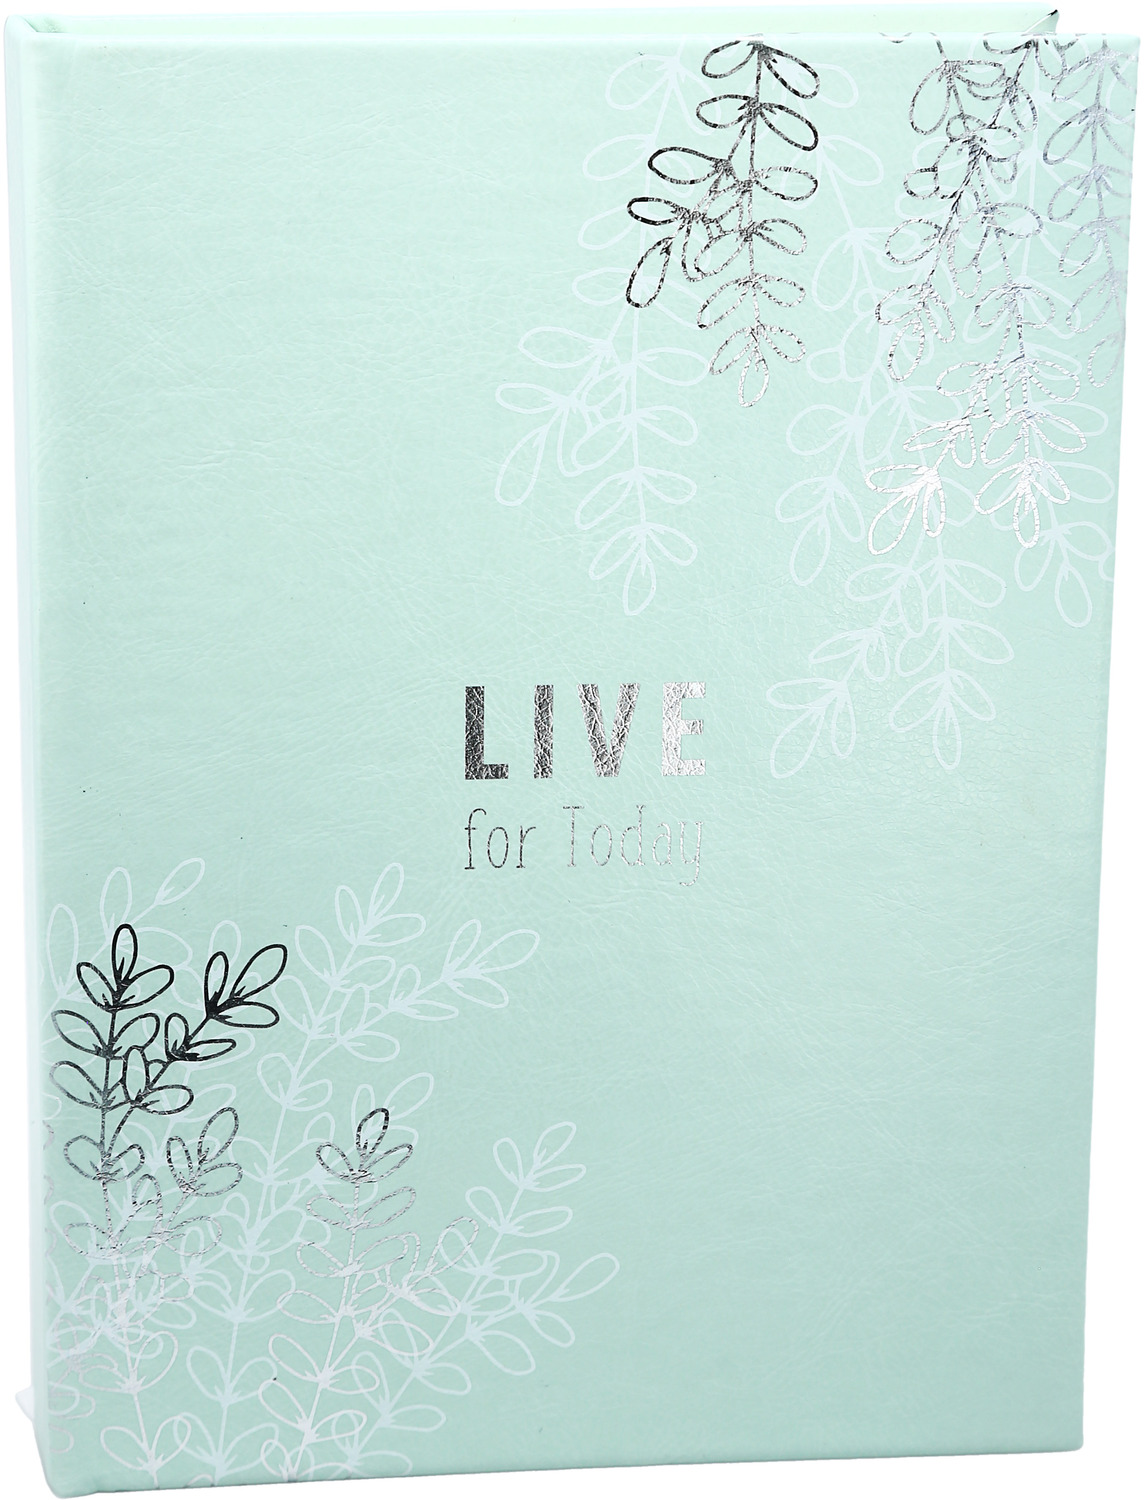 Live by Faith Hope and Healing - Live - 6.25" x 8.75" Inspiration Journal